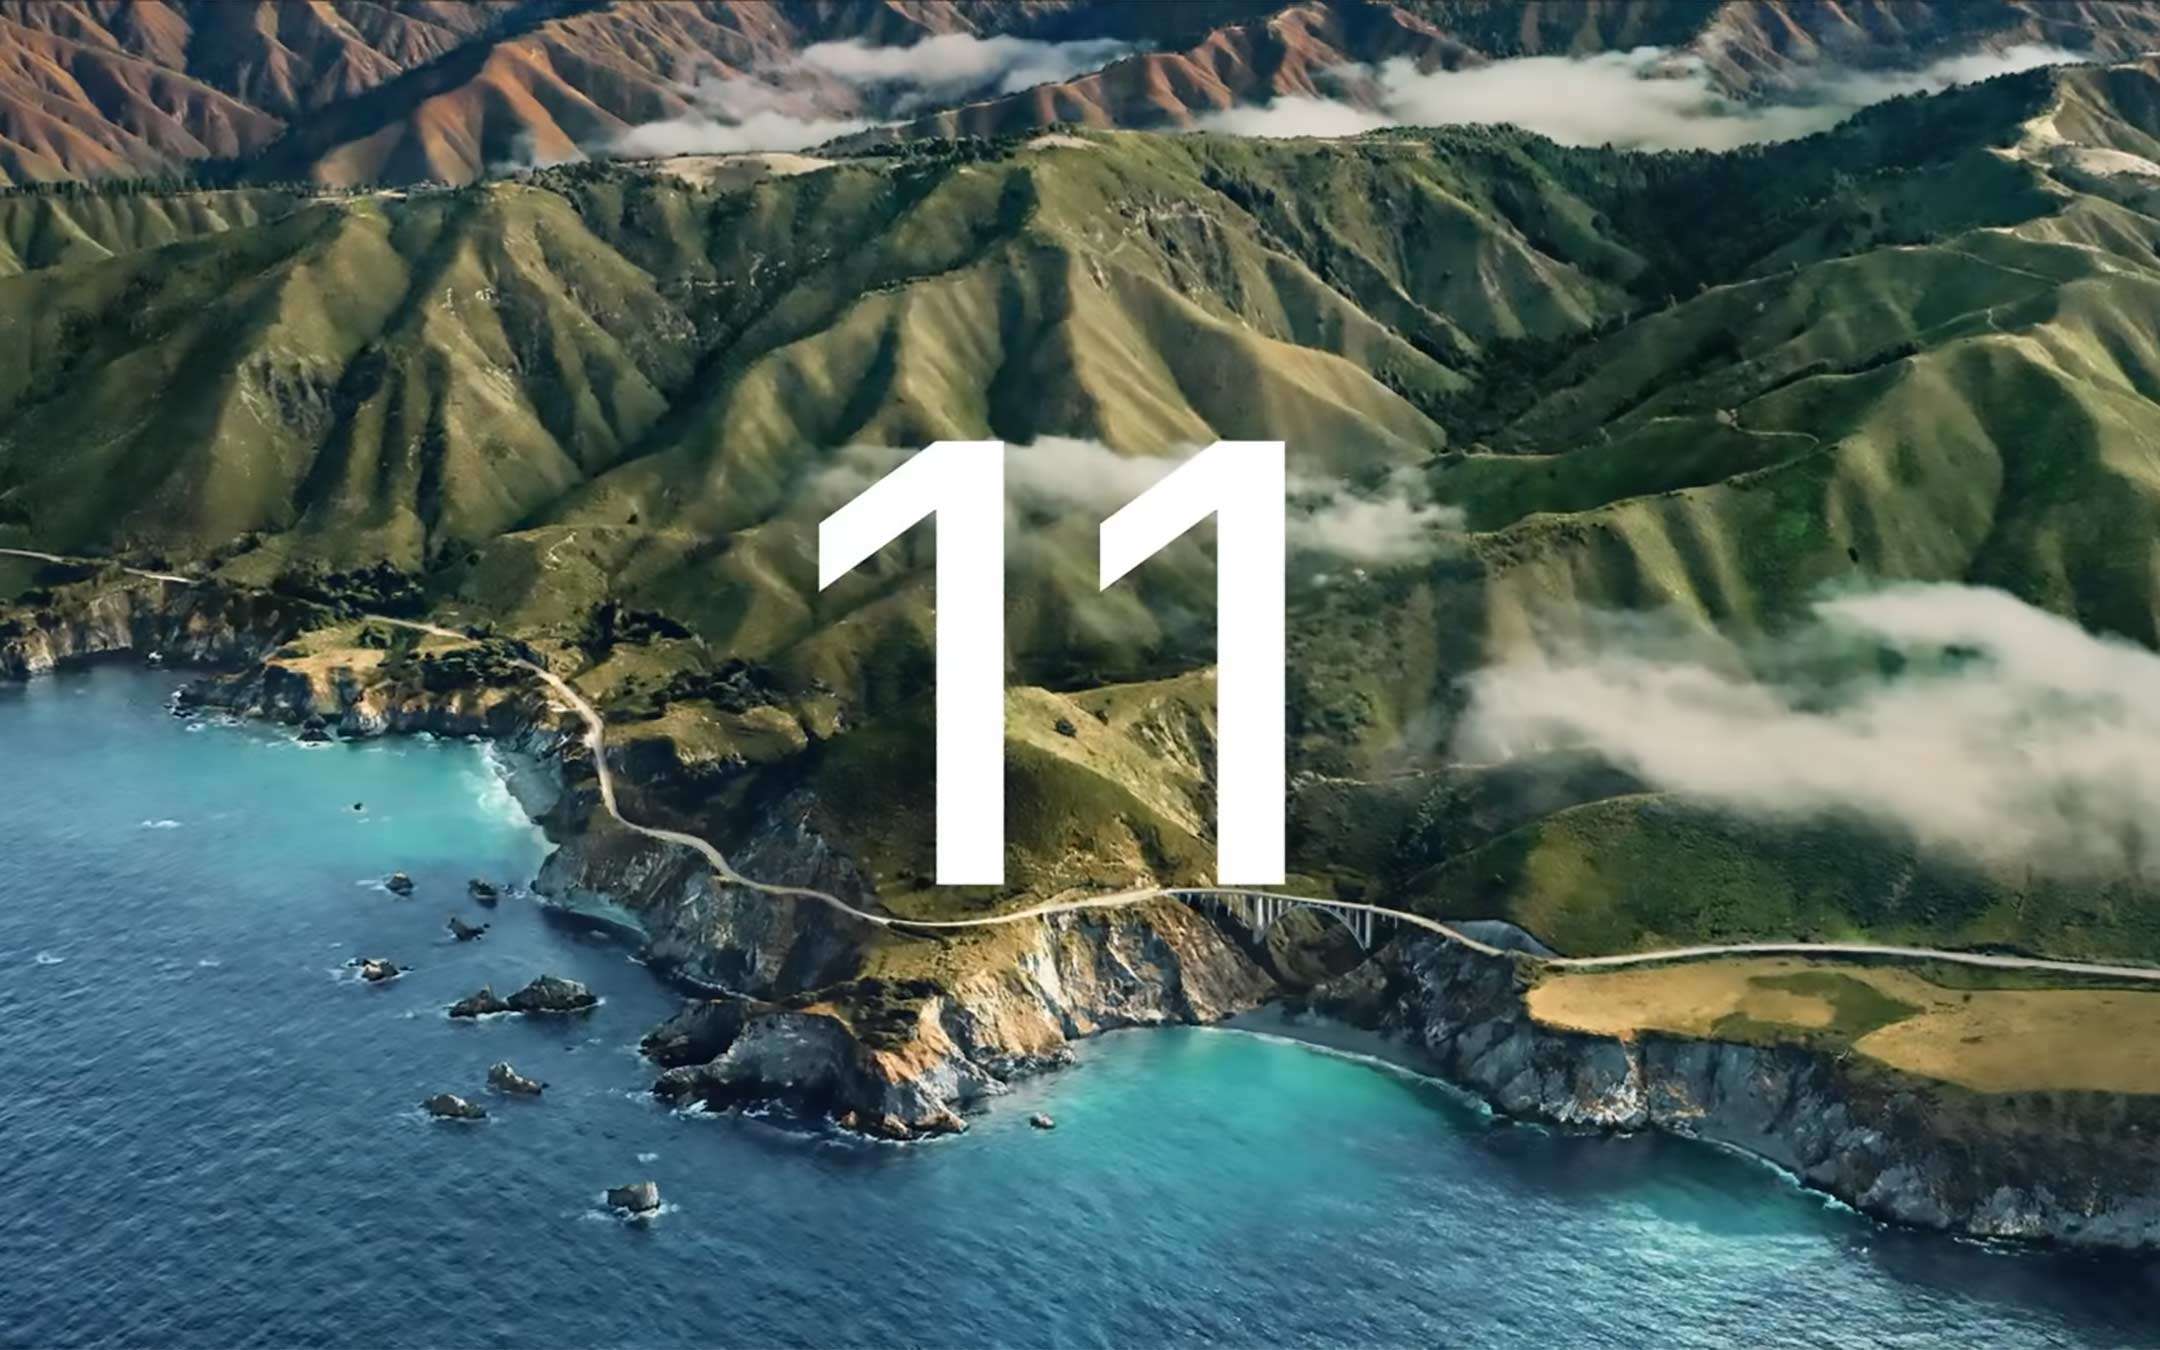 macOS 11 Big Sur: here is the public beta